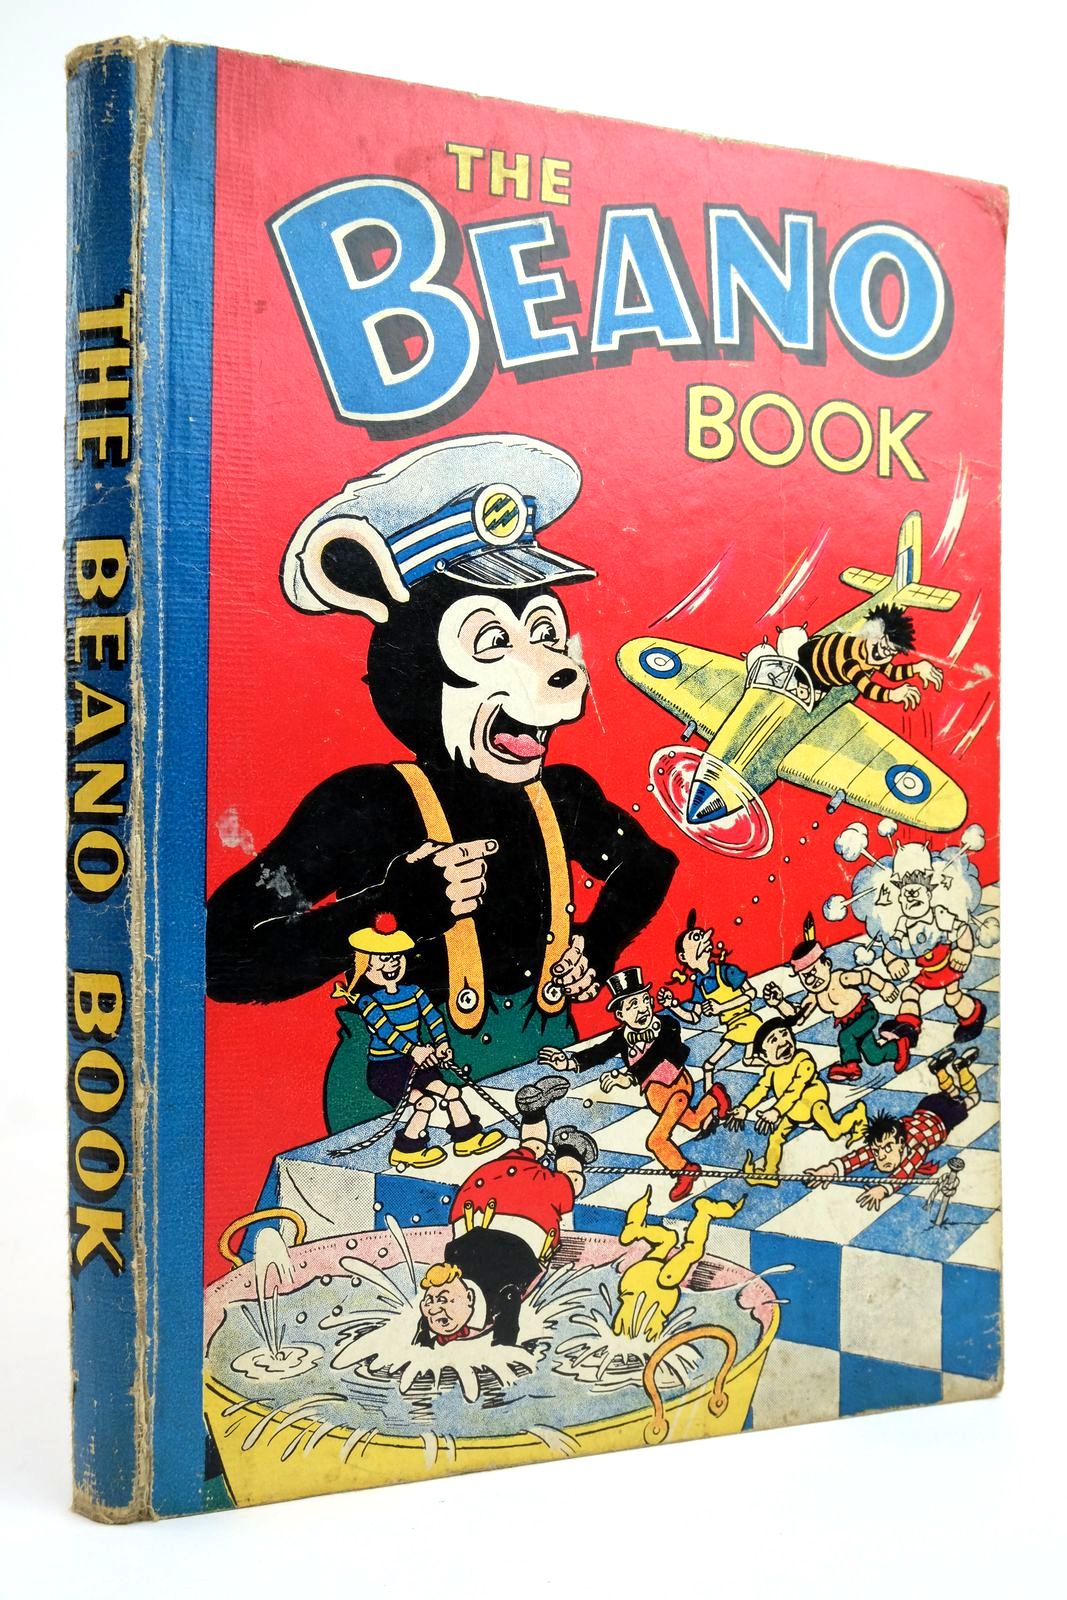 Photo of THE BEANO BOOK 1956 published by D.C. Thomson &amp; Co Ltd. (STOCK CODE: 2135414)  for sale by Stella & Rose's Books